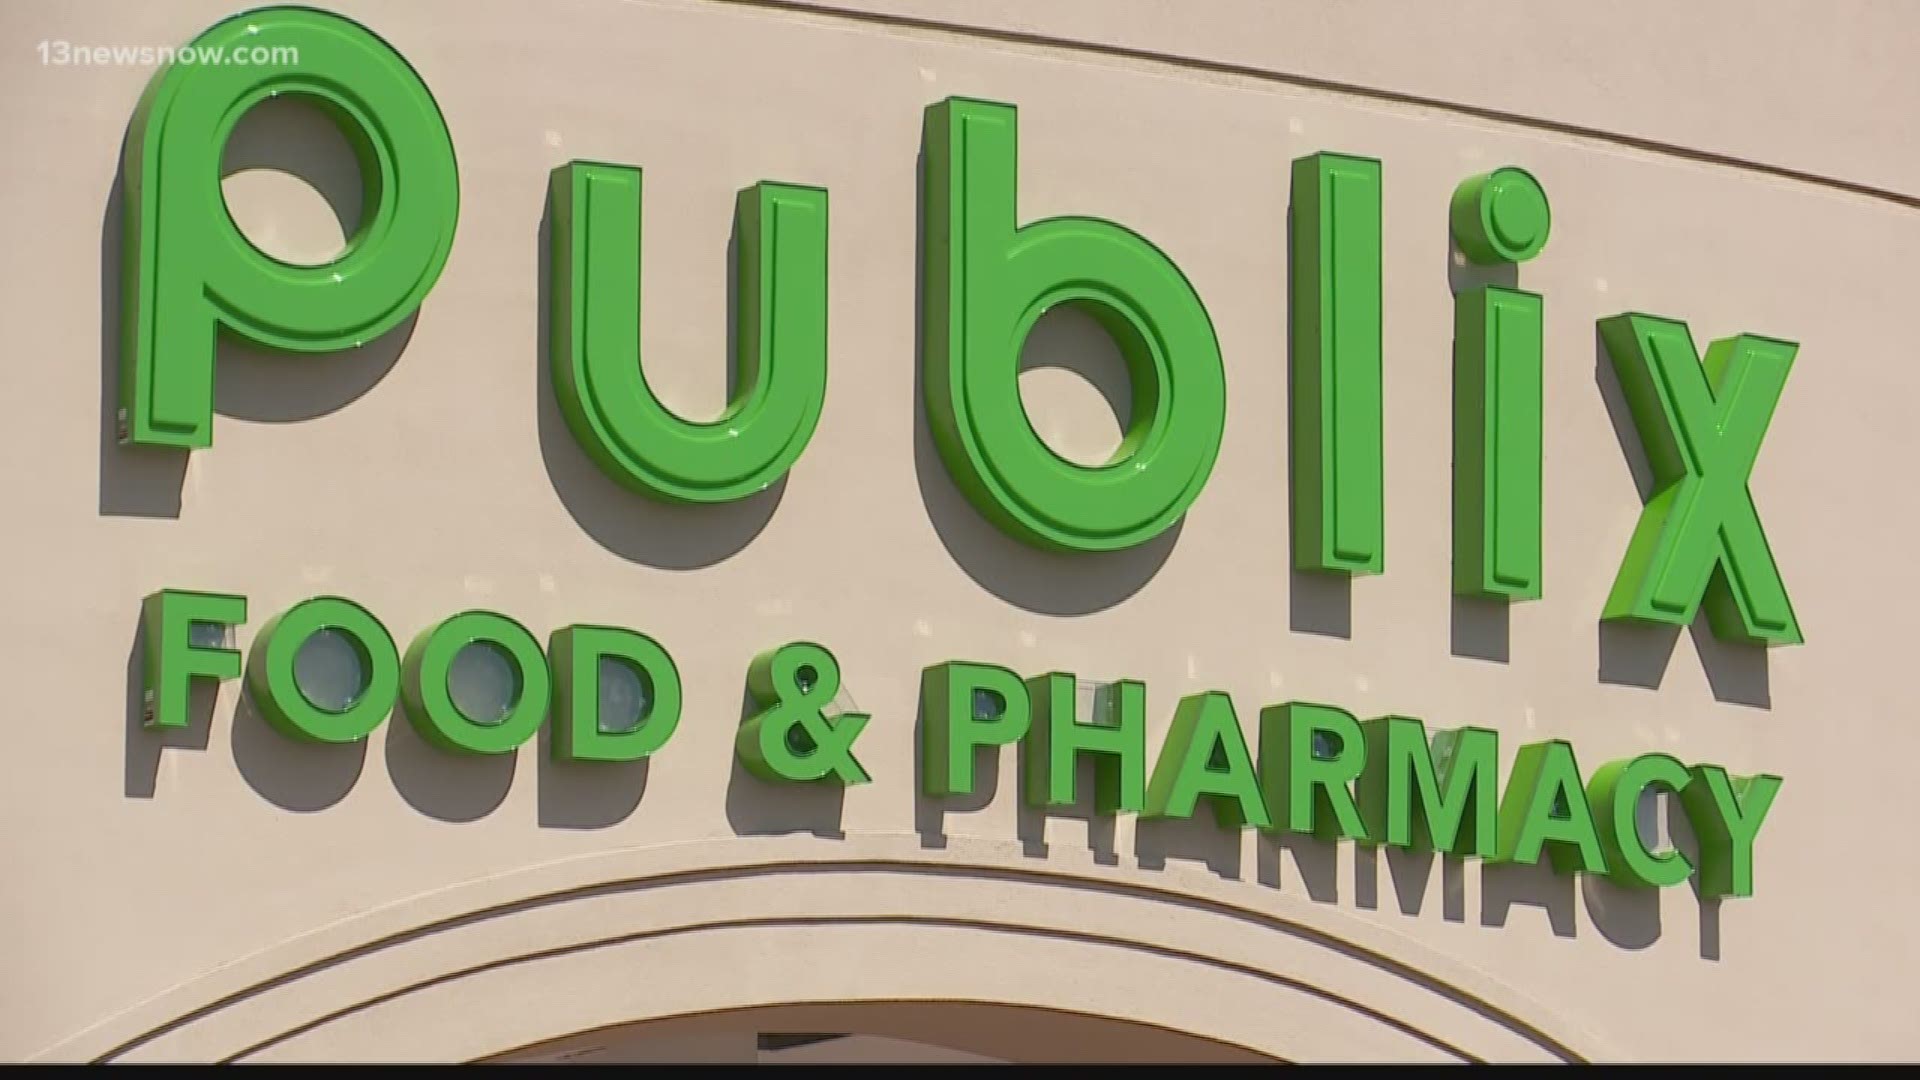 A Publix will soon be open in Williamsburg!